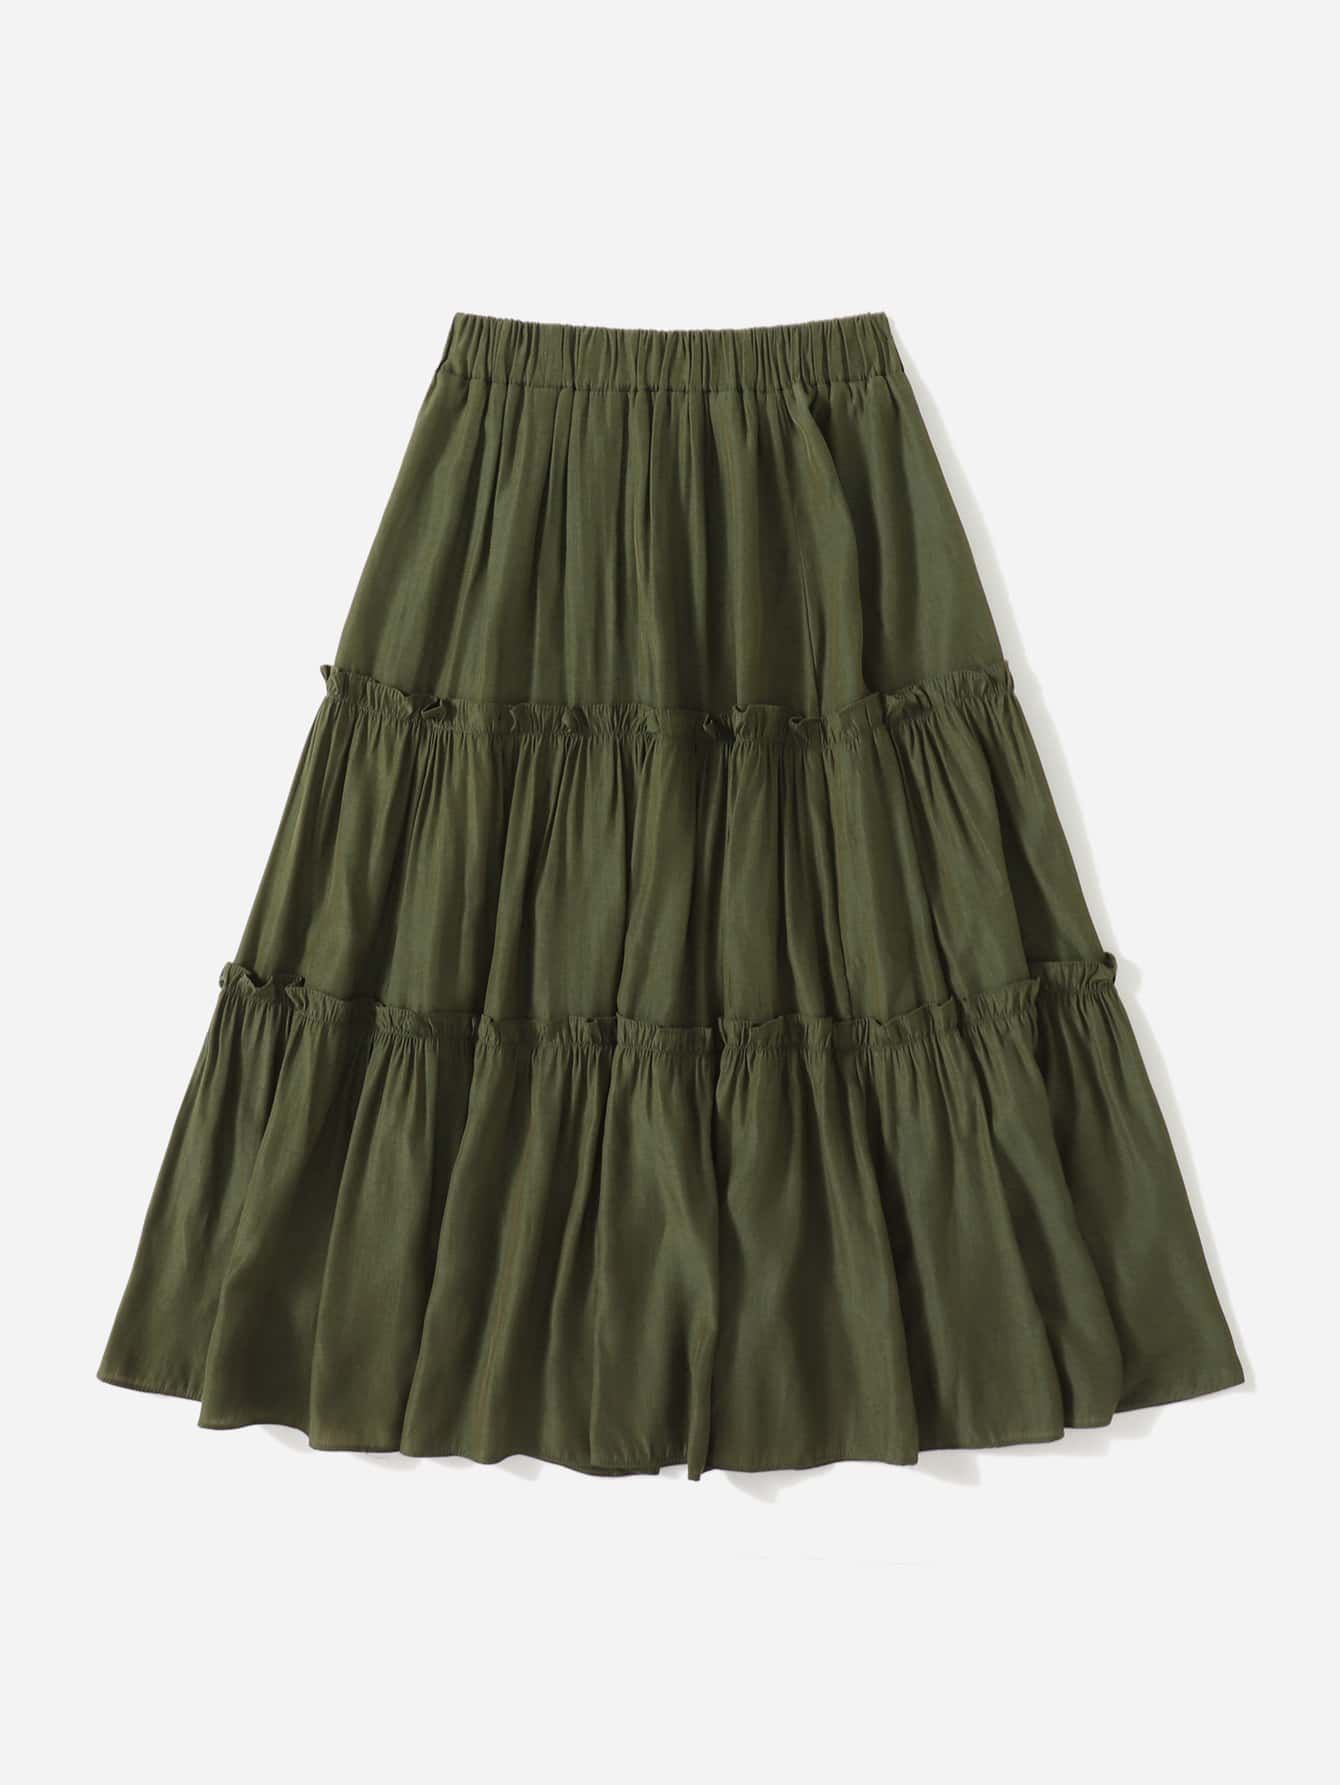 Be a sight of attraction with trendiest
designs of green skirt